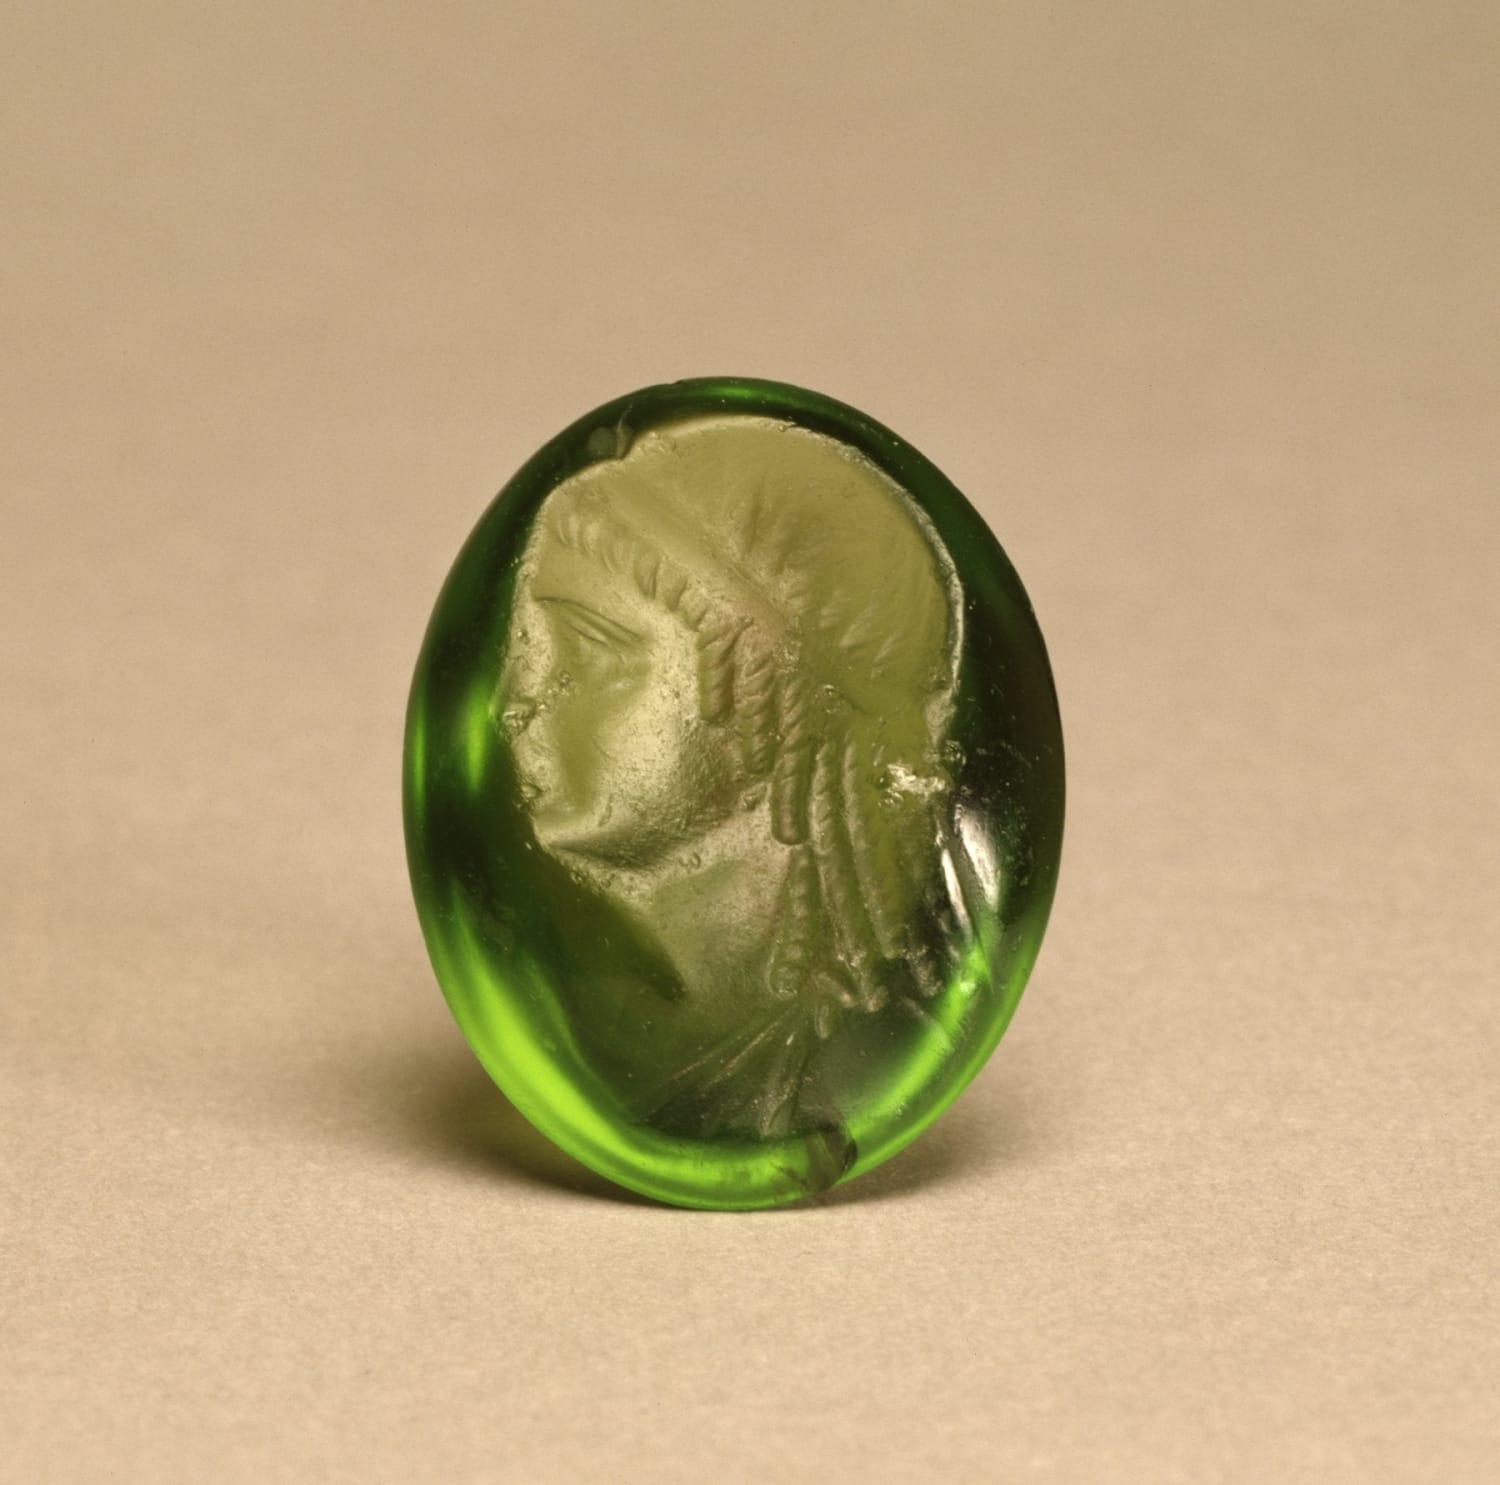 Ancient Greek-Egyptian (Hellenistic-Ptolemaic) carved peridot intaglio portrait of Cleopatra II, c. 175-115 BCE.